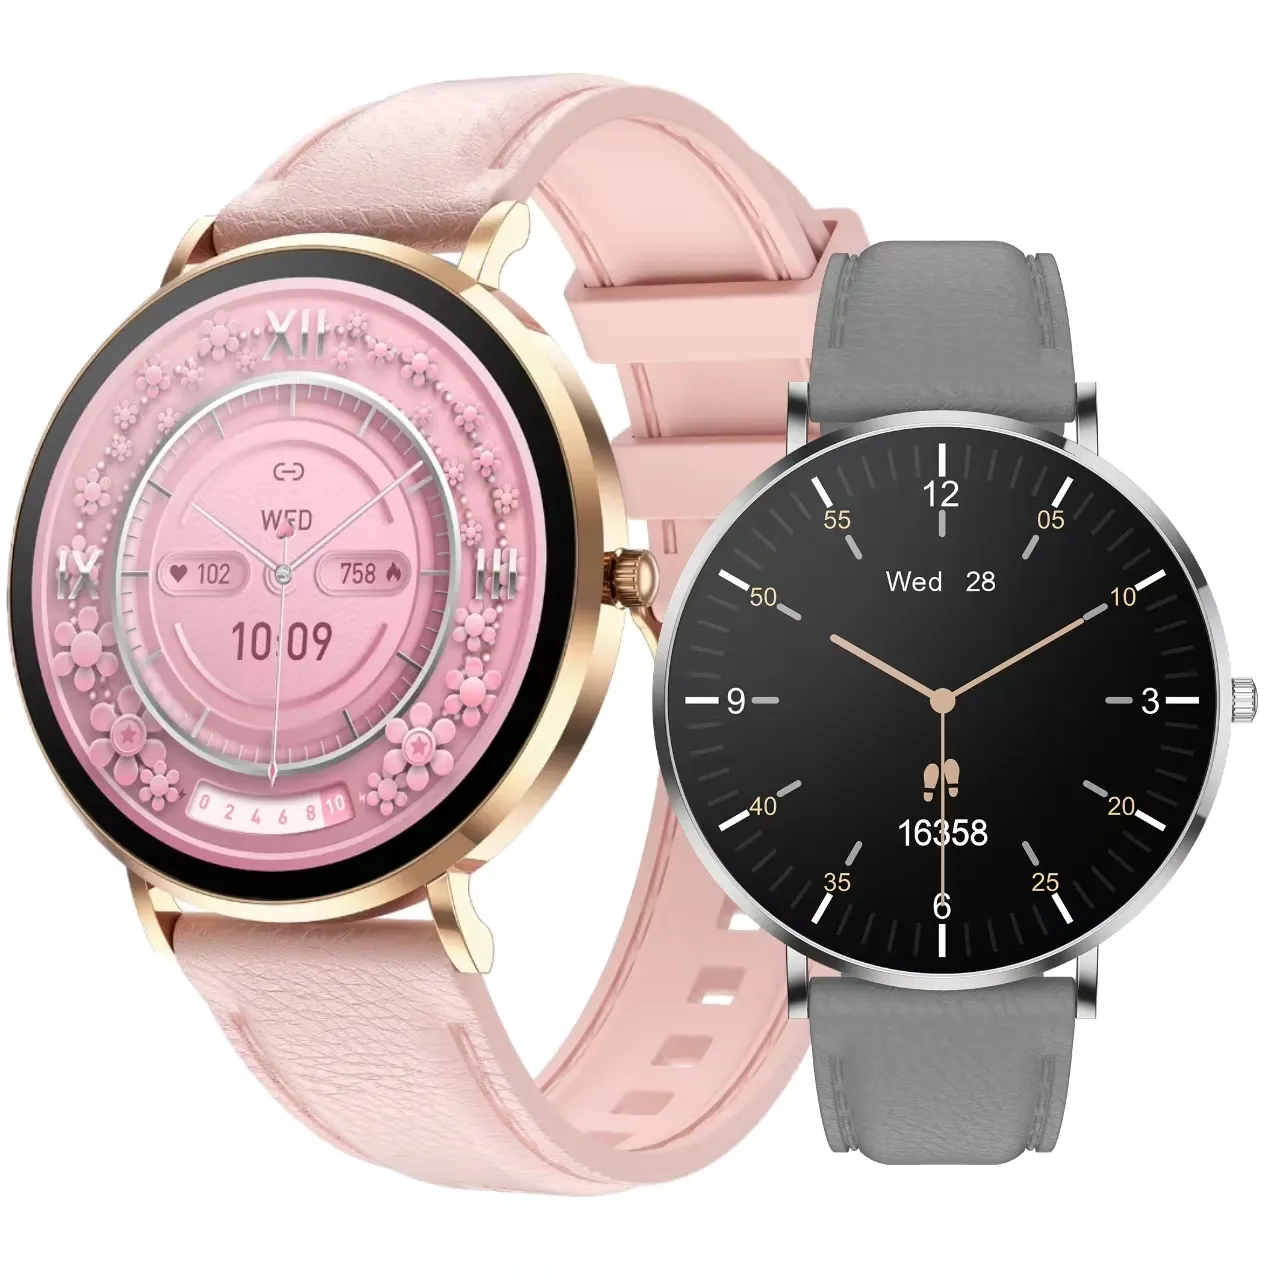 T8Pro Women'S Smart Watch Round Screen With Full Touch Ip68 Waterproof Android Iso Digital New Wearable Technology